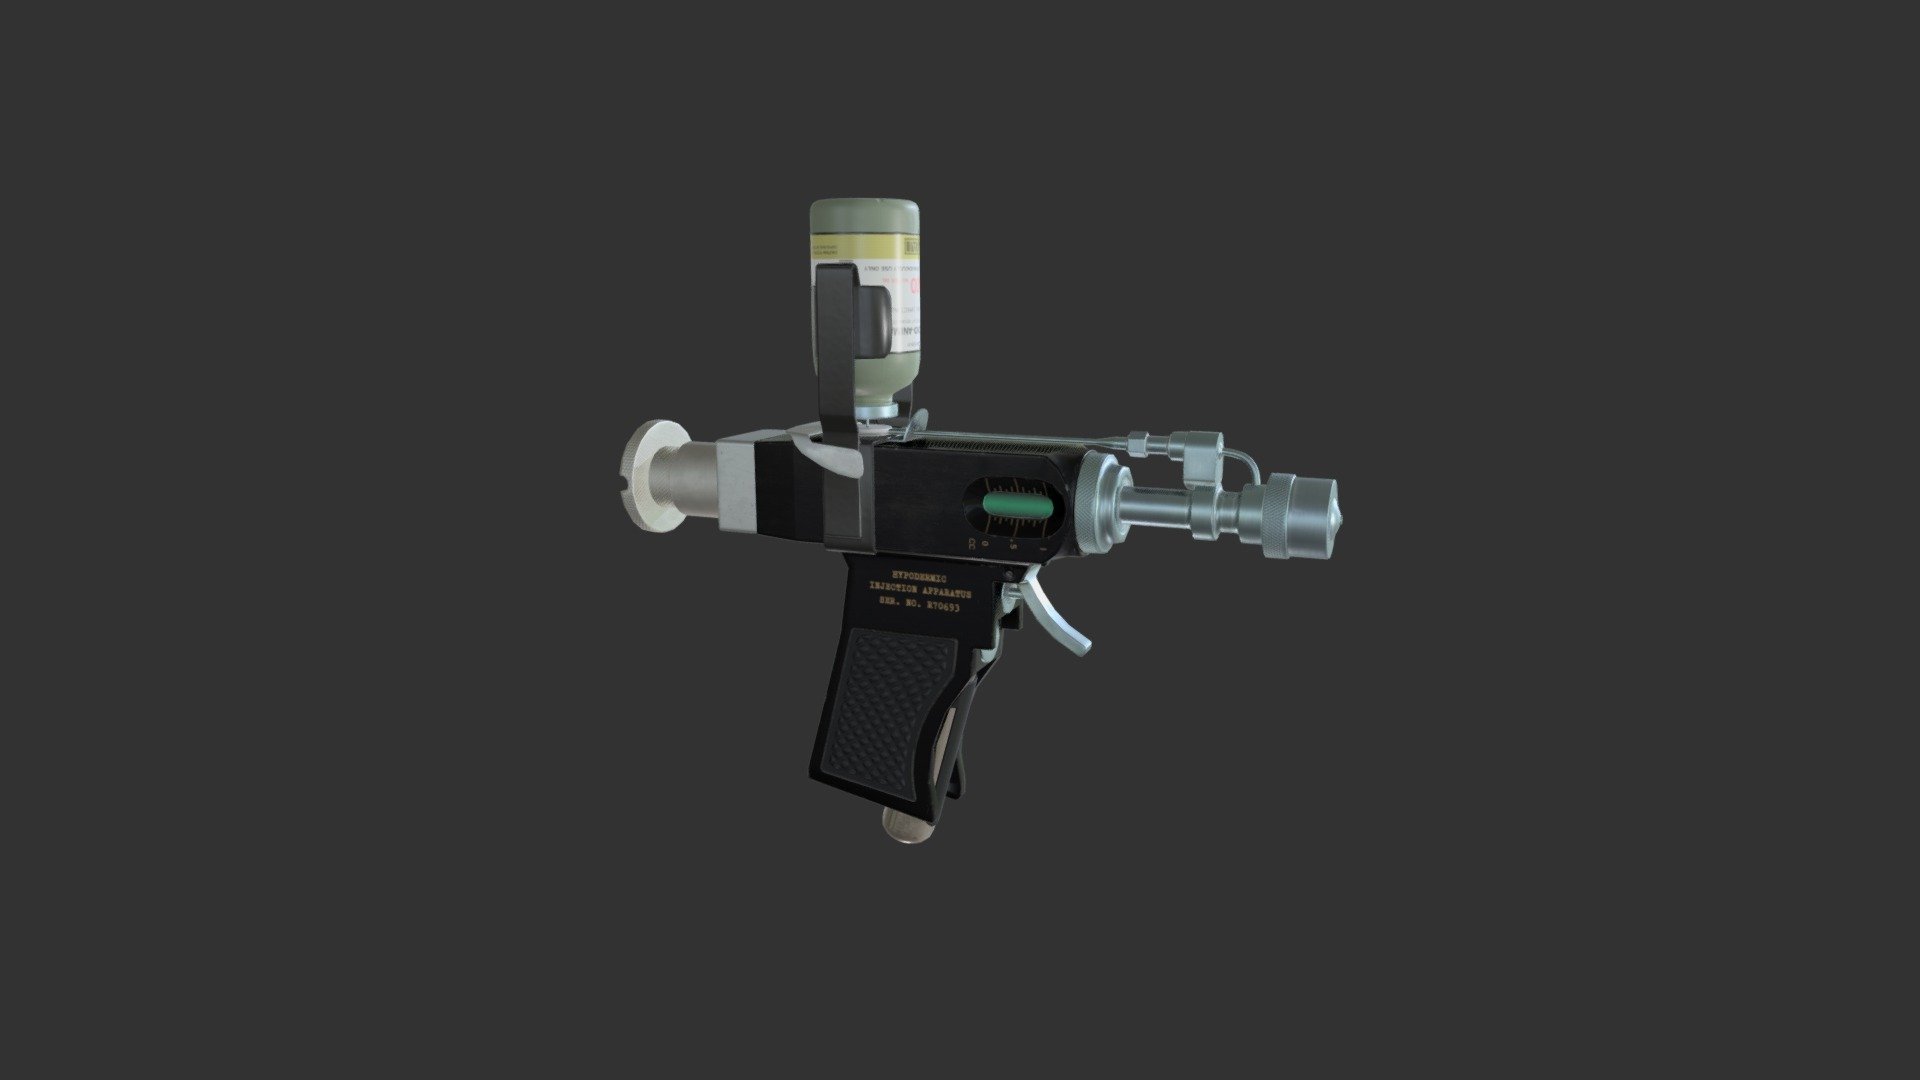 Injection gun for upcoming title Cold Comfort by Gamma Minus

http://coldcomfortgame.com/

Check out more details here https://www.artstation.com/artwork/0XLZvY - Injector Gun - 3D model by Ryan Kohr (@kohr_ryan) 3d model